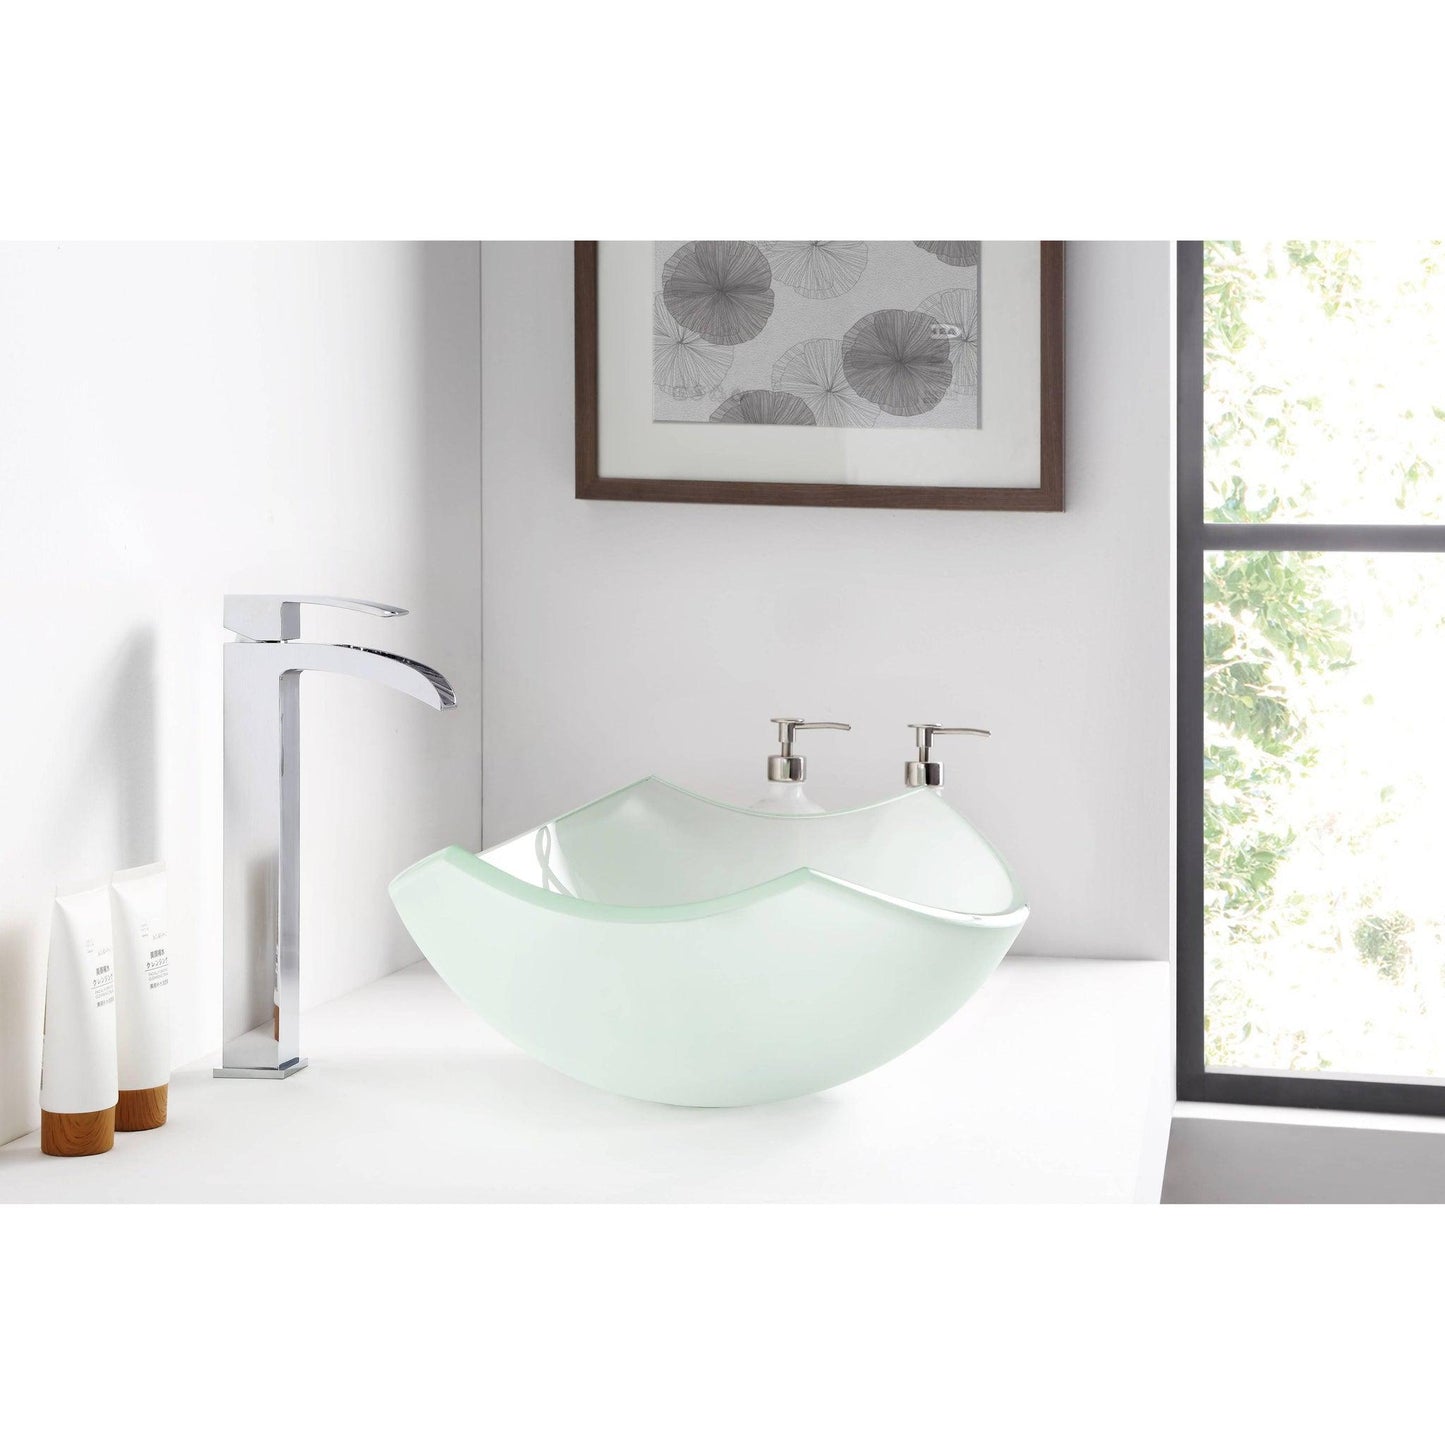 ANZZI Pendant Series 20" x 15" Oval Shaped Lustrous Frosted Deco-Glass Vessel Sink With Polished Chrome Pop-Up Drain